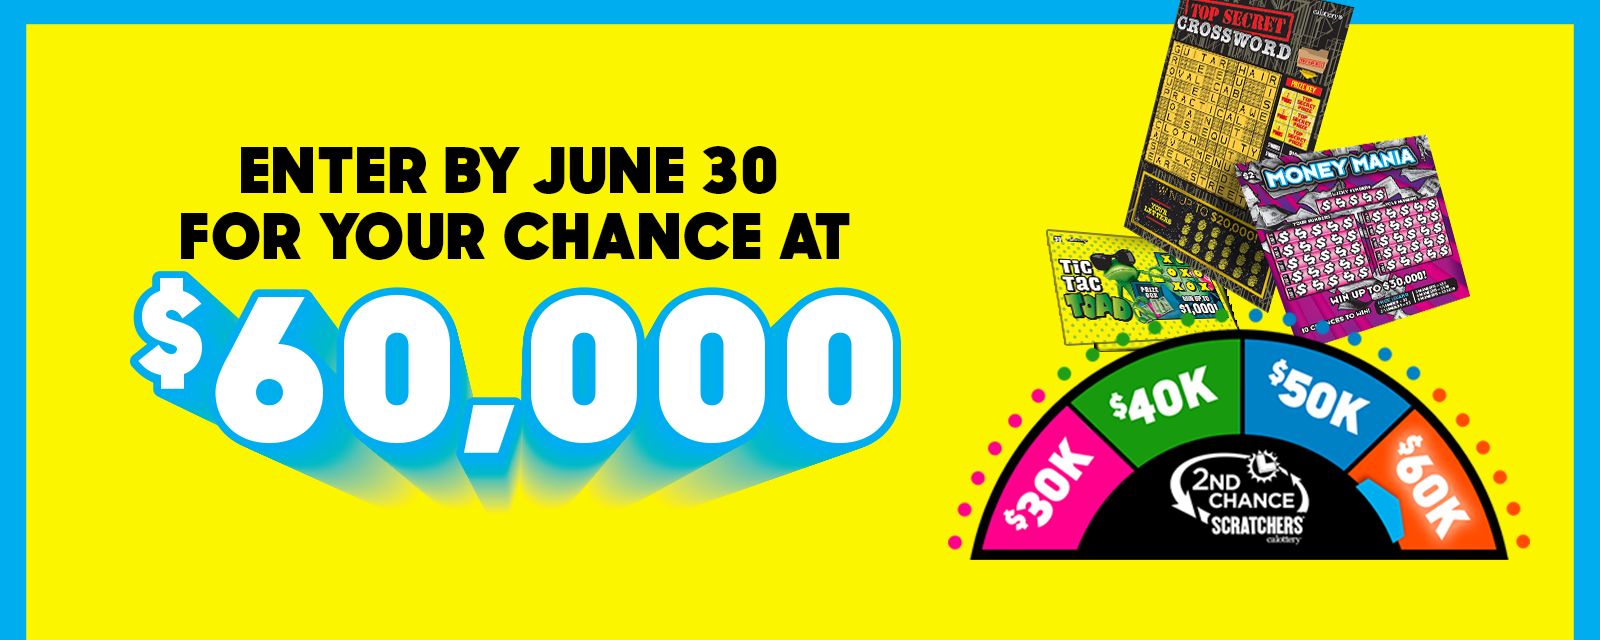 Enter by June 30 for your chance at $60,000